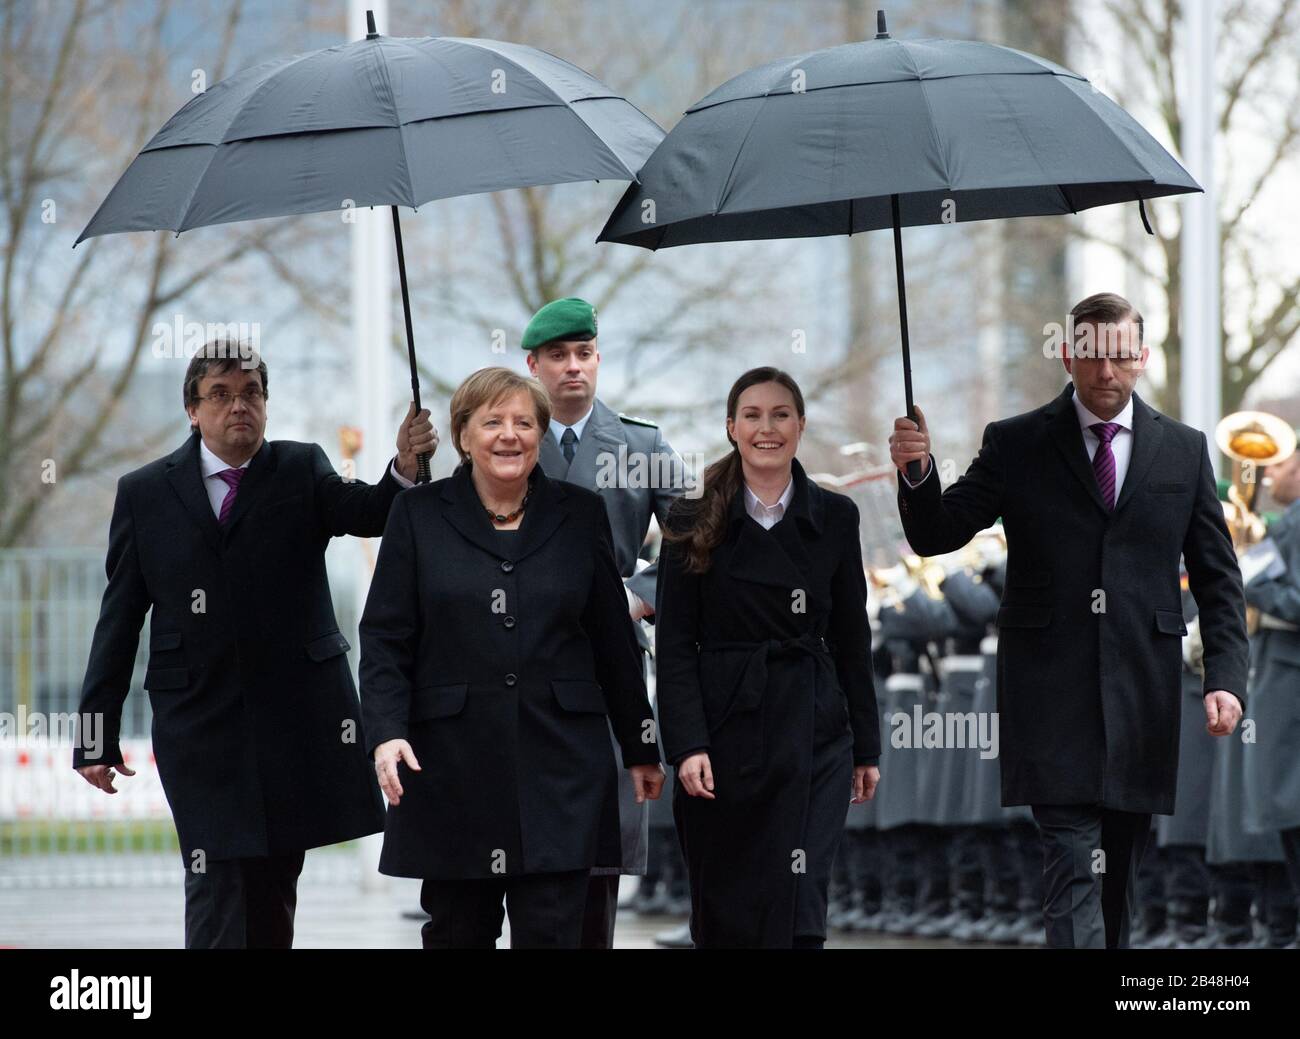 Chancellor Angela MERKEL and Minister President Sanna MARIN Reception and greeting of the Minister President of the Republic of Finland with military honors at the Federal Chancellery, Berlin, Germany on February 19, 2020. | usage worldwide Stock Photo